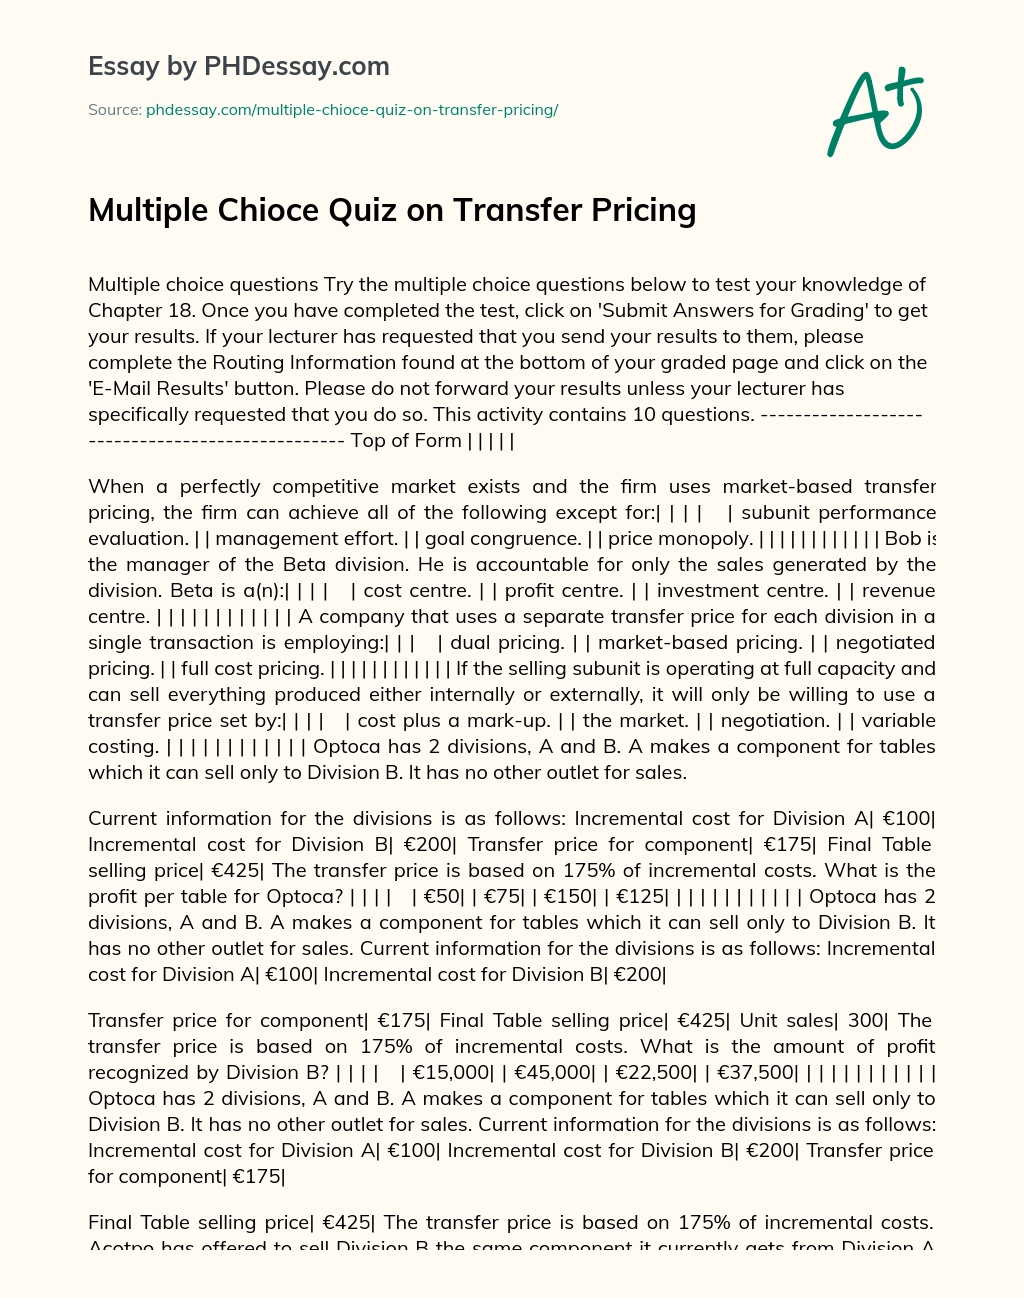 Multiple Chioce Quiz on Transfer Pricing essay